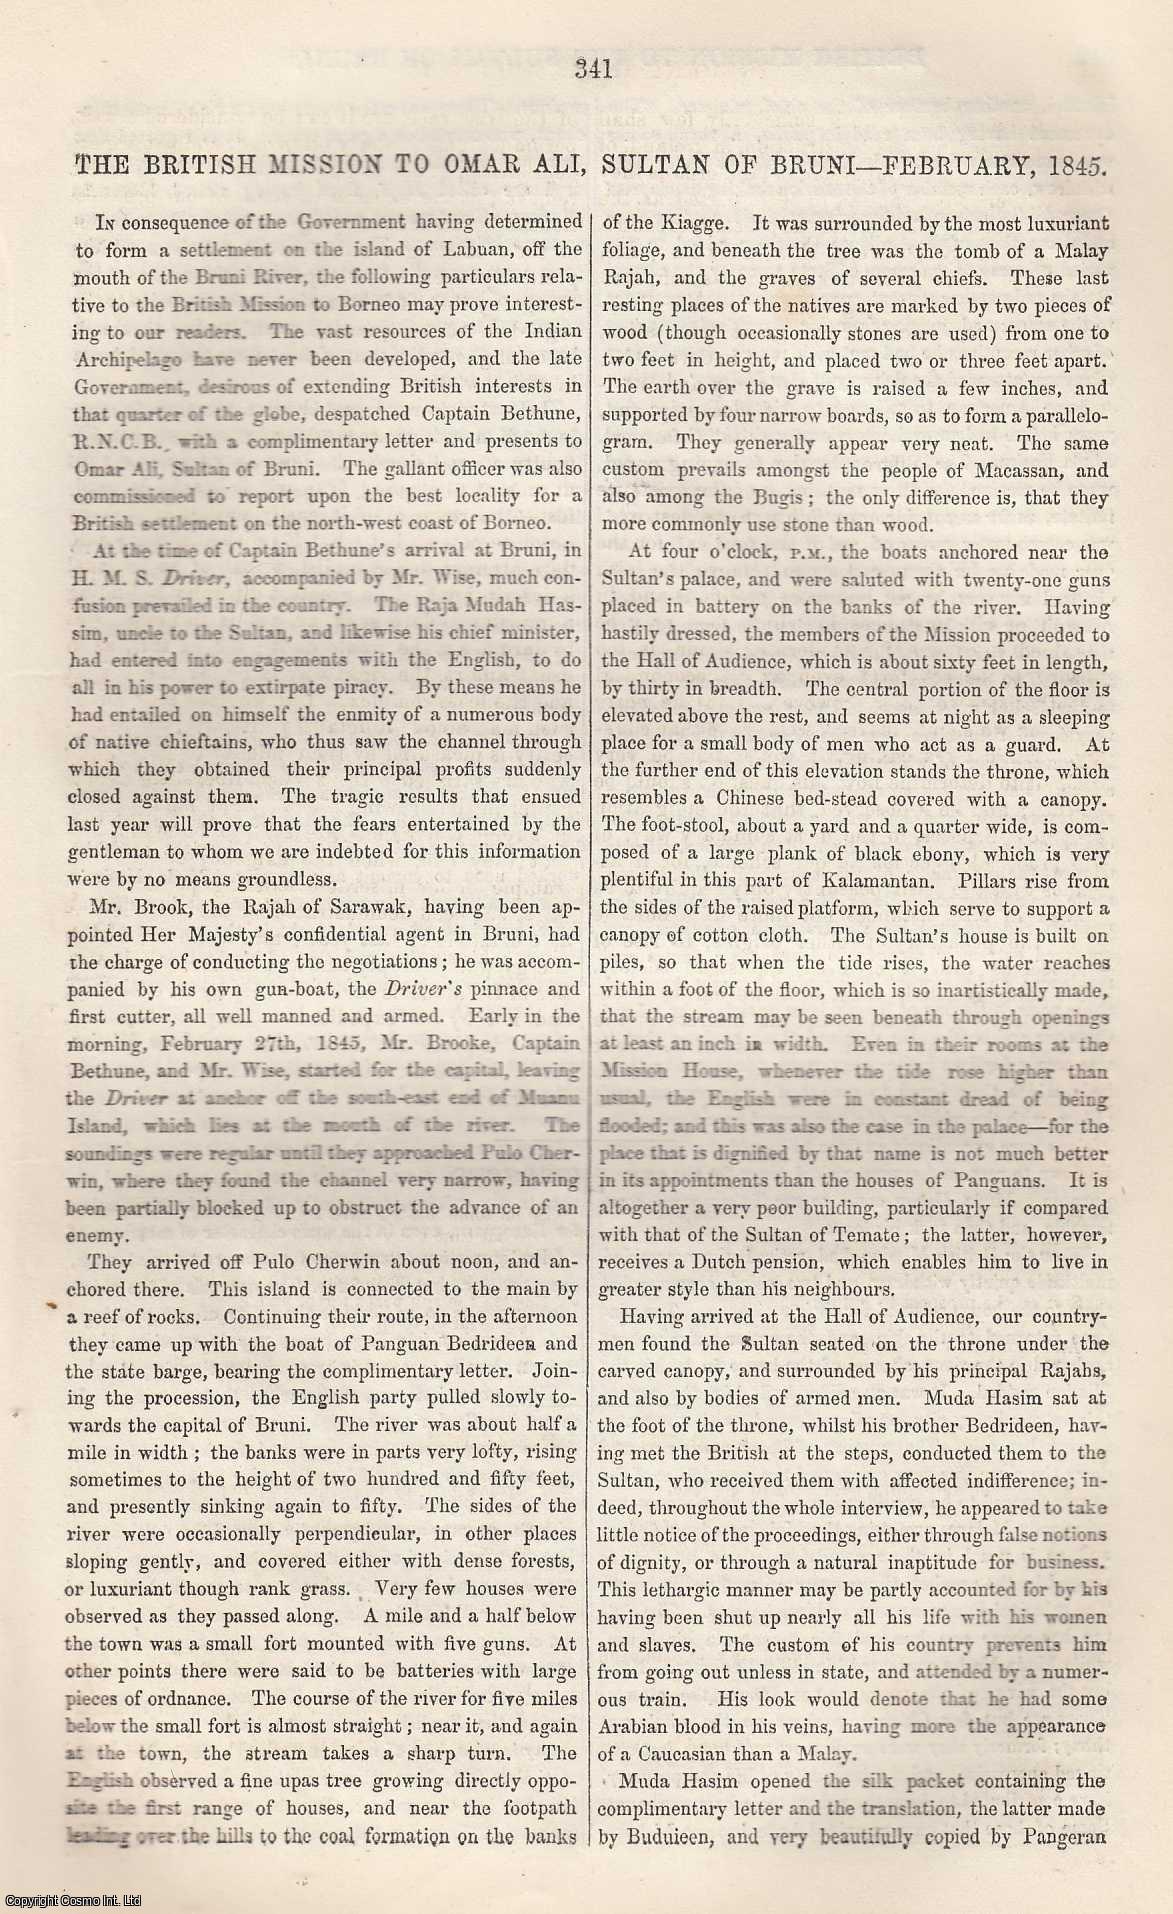 No Author Stated - The British Mission to Omar Ali, Sultan of Bruni-February, 1845. An original article from Tait's Edinburgh Magazine, 1847.